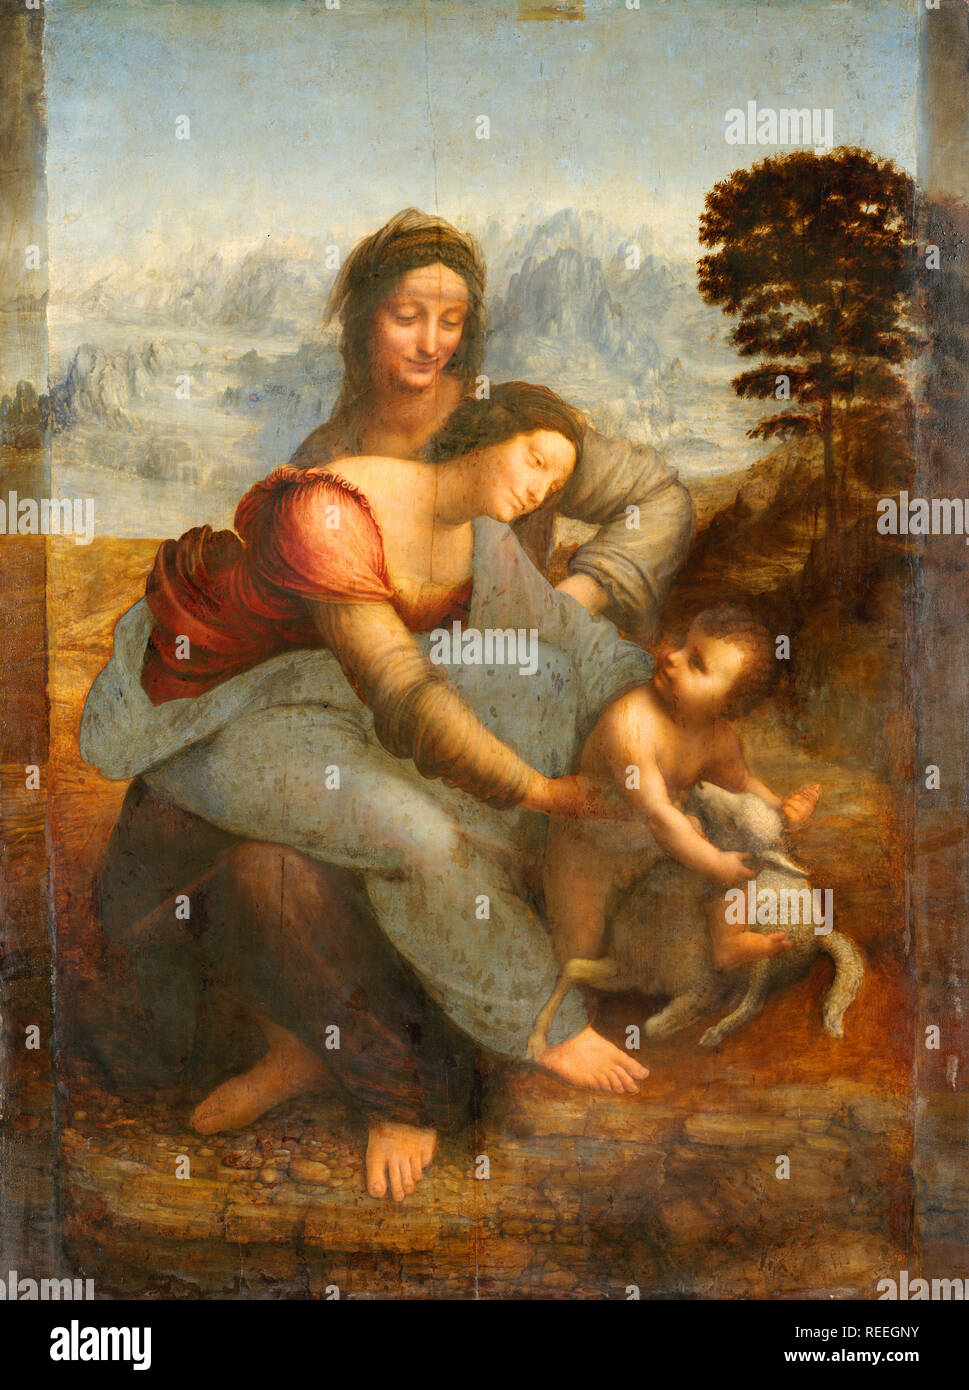 The Virgin and Child with St. Anne, The Virgin and Child with Saint Anne by Leonardo da Vinci depicting St Anne, her daughter the Virgin Mary and the infant Jesus. Stock Photo